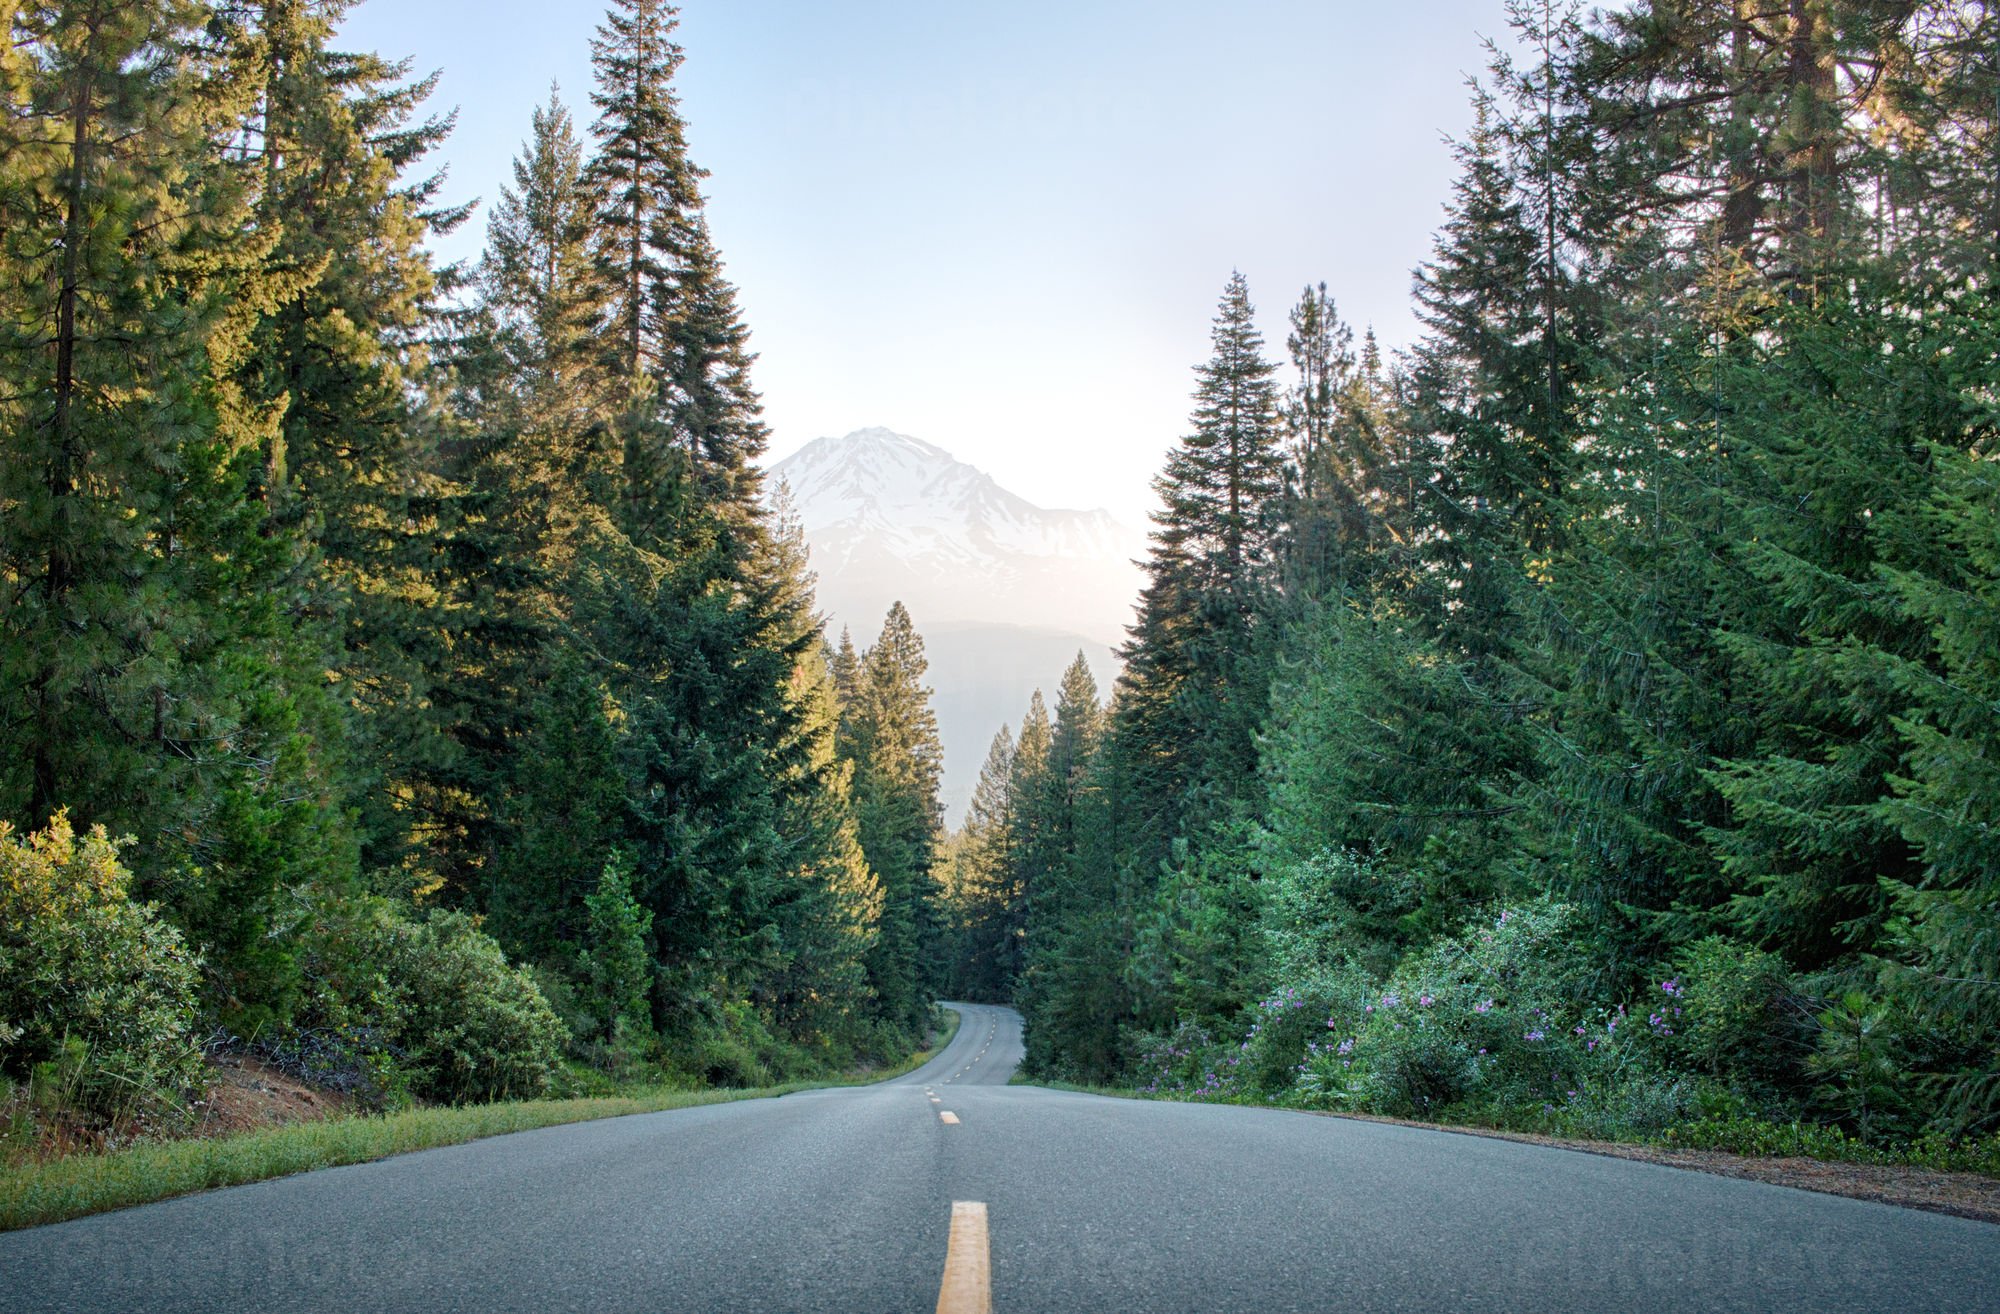 Middle Of The Road View Of A Distant Mountain With Trees On Both Sides Stock Photo Pixeltote